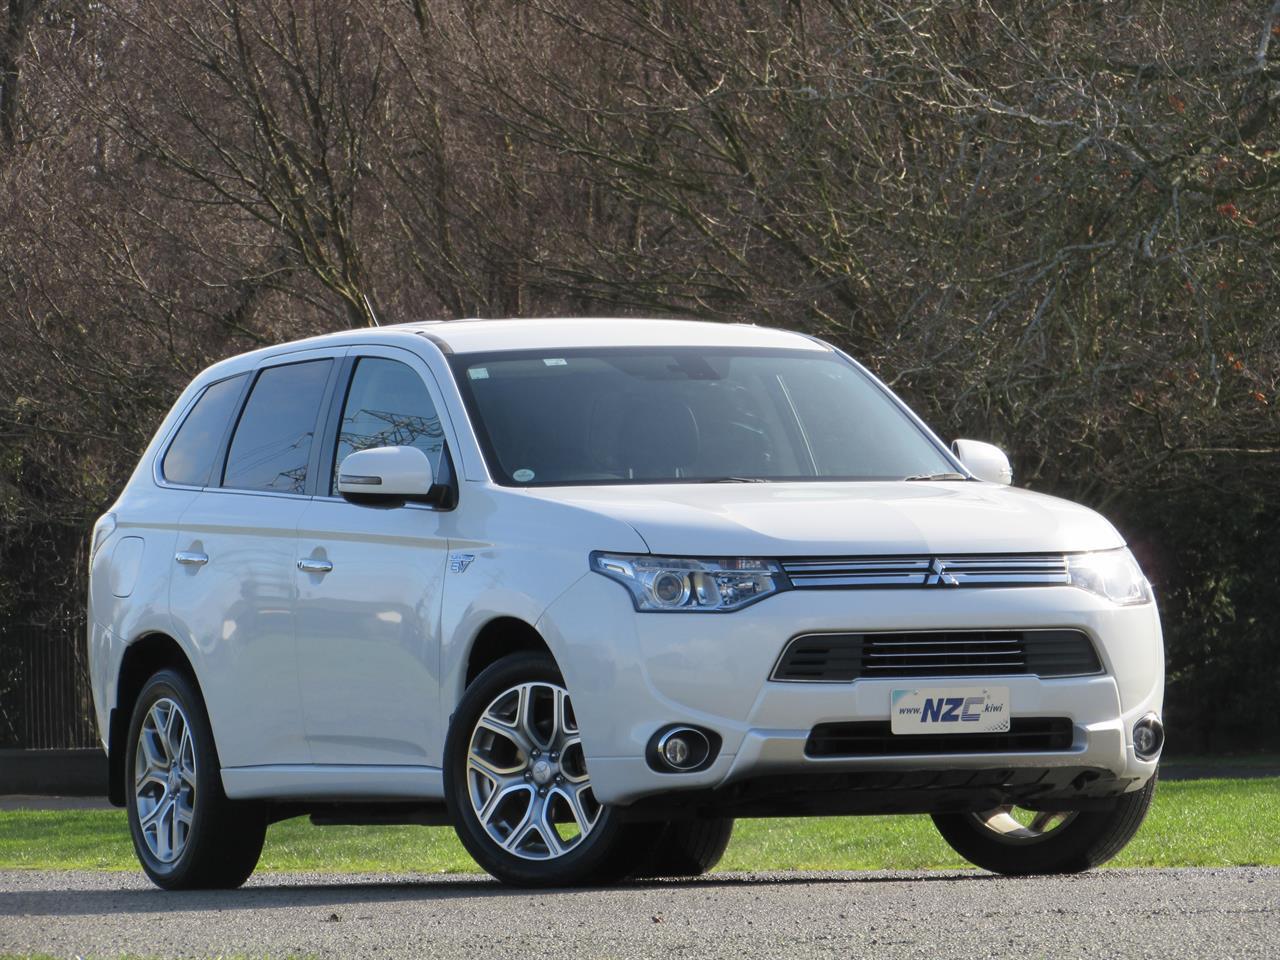 NZC best hot price for 2014 Mitsubishi OUTLANDER in Christchurch